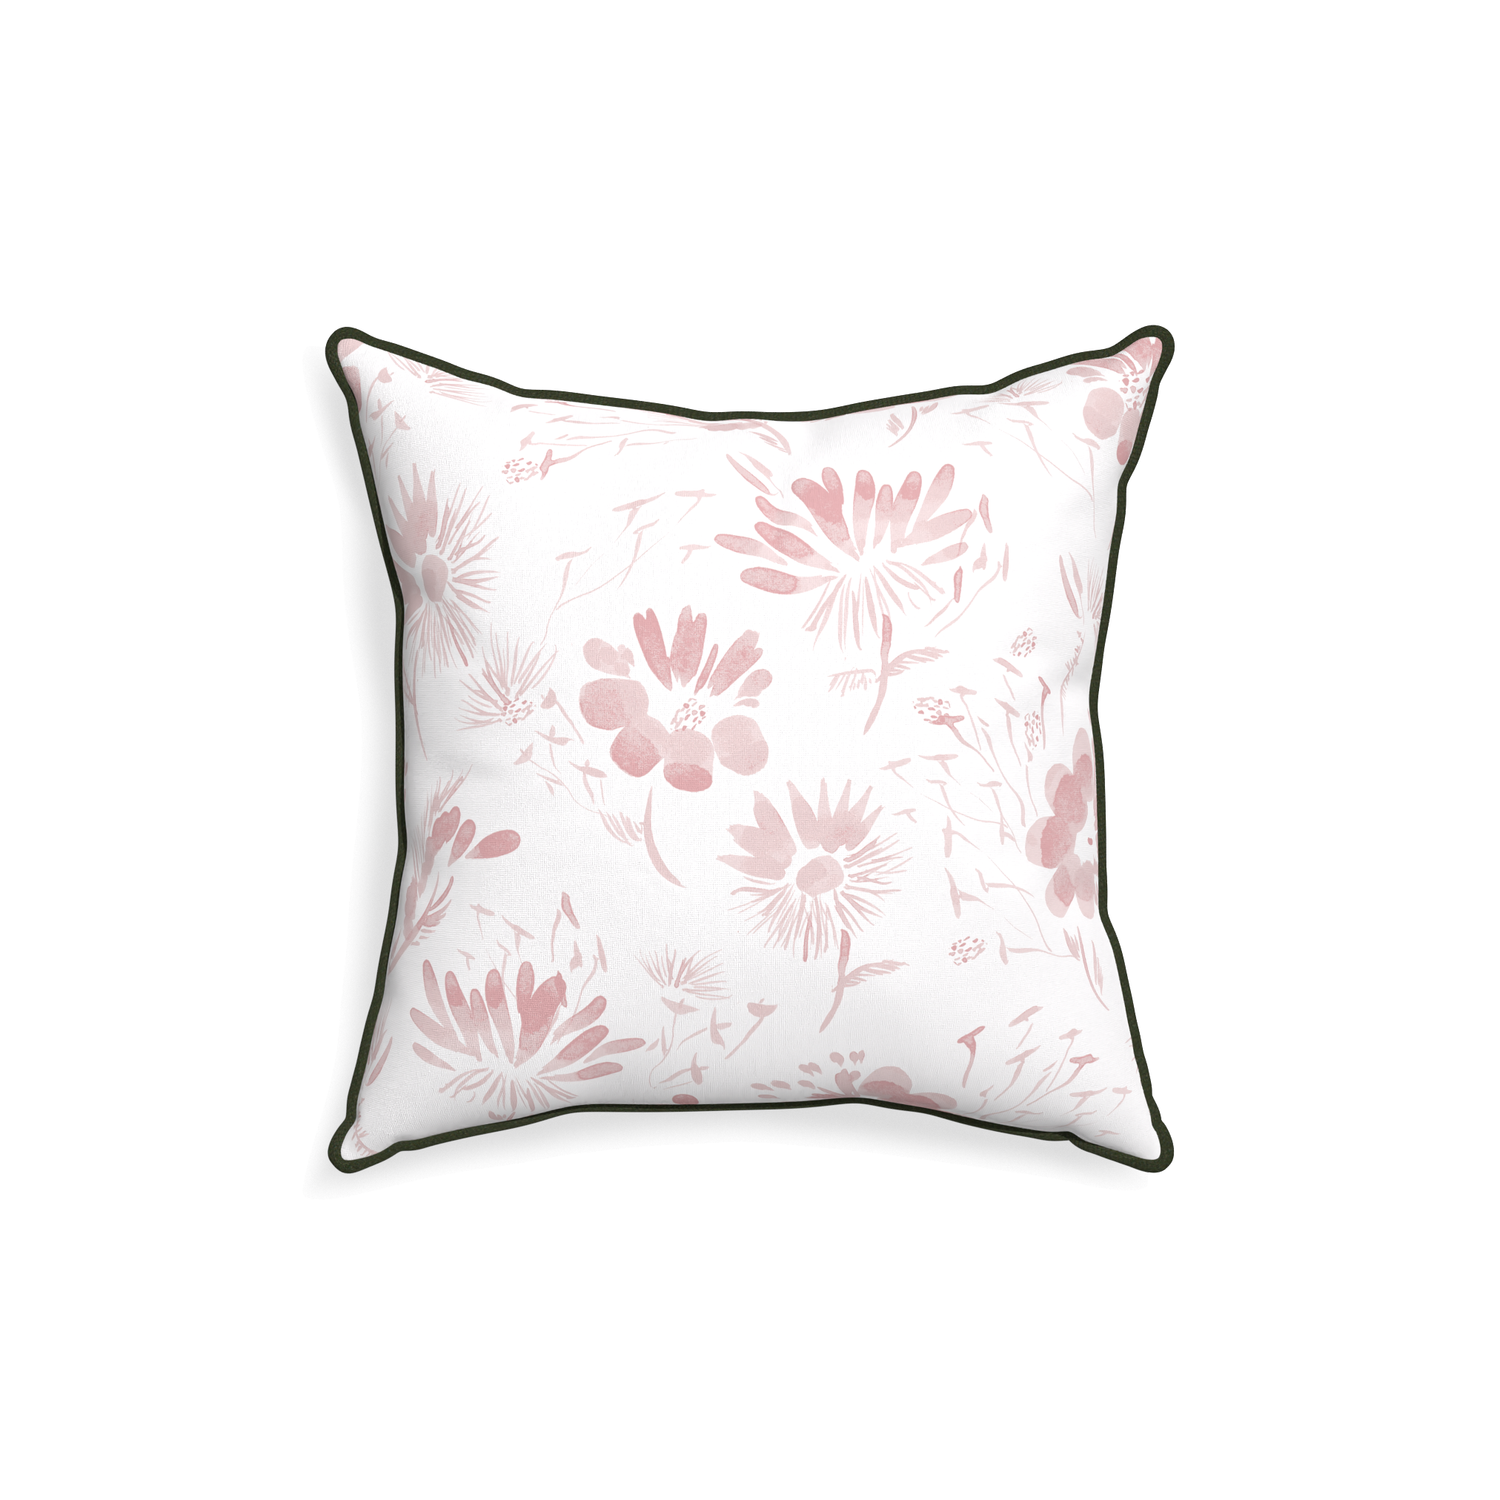 18-square blake custom pink floralpillow with f piping on white background